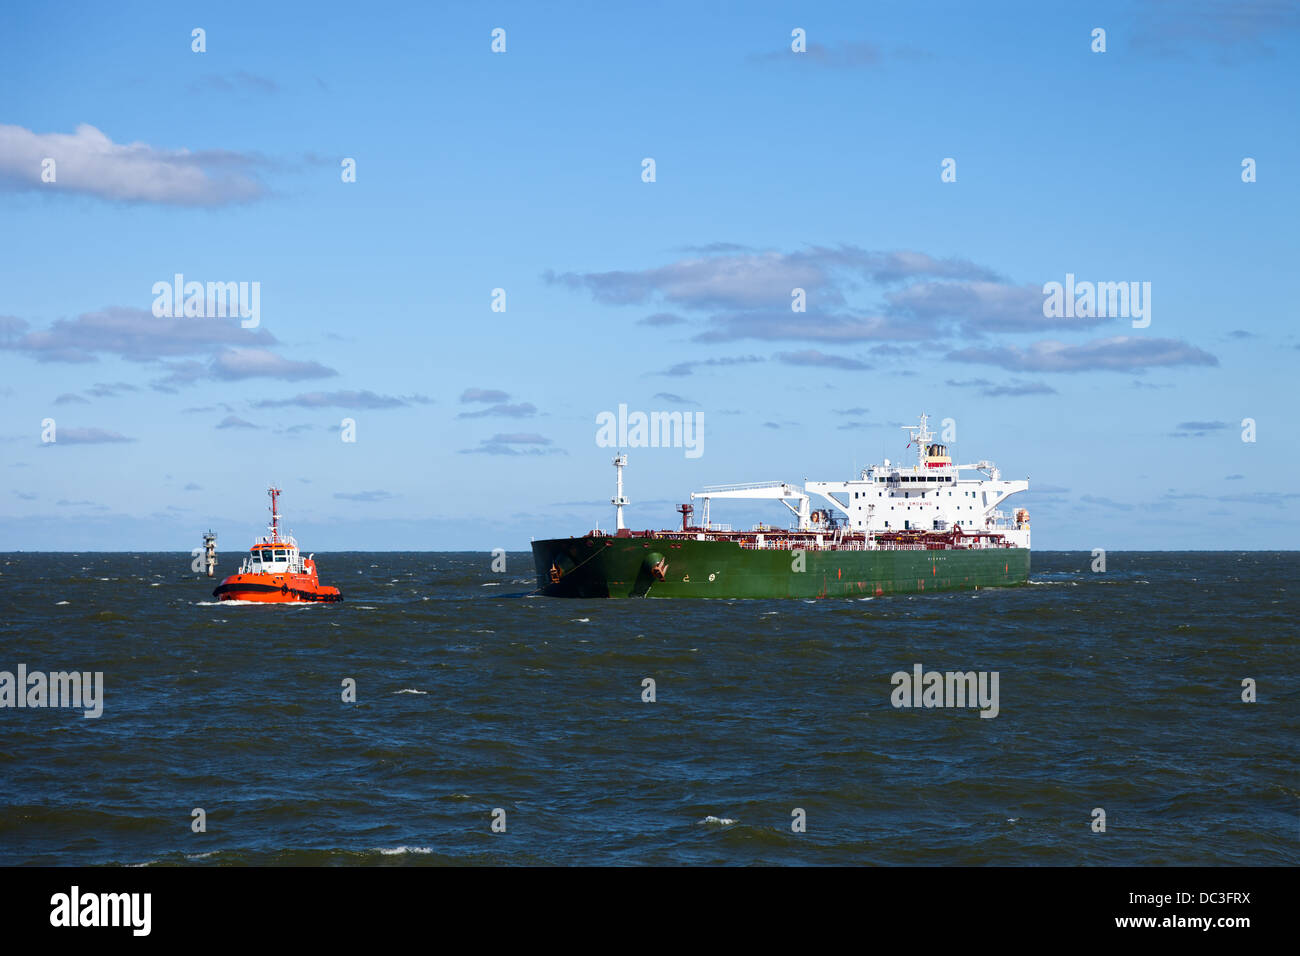 A huge oil tanker and a tugboat at work. Stock Photo